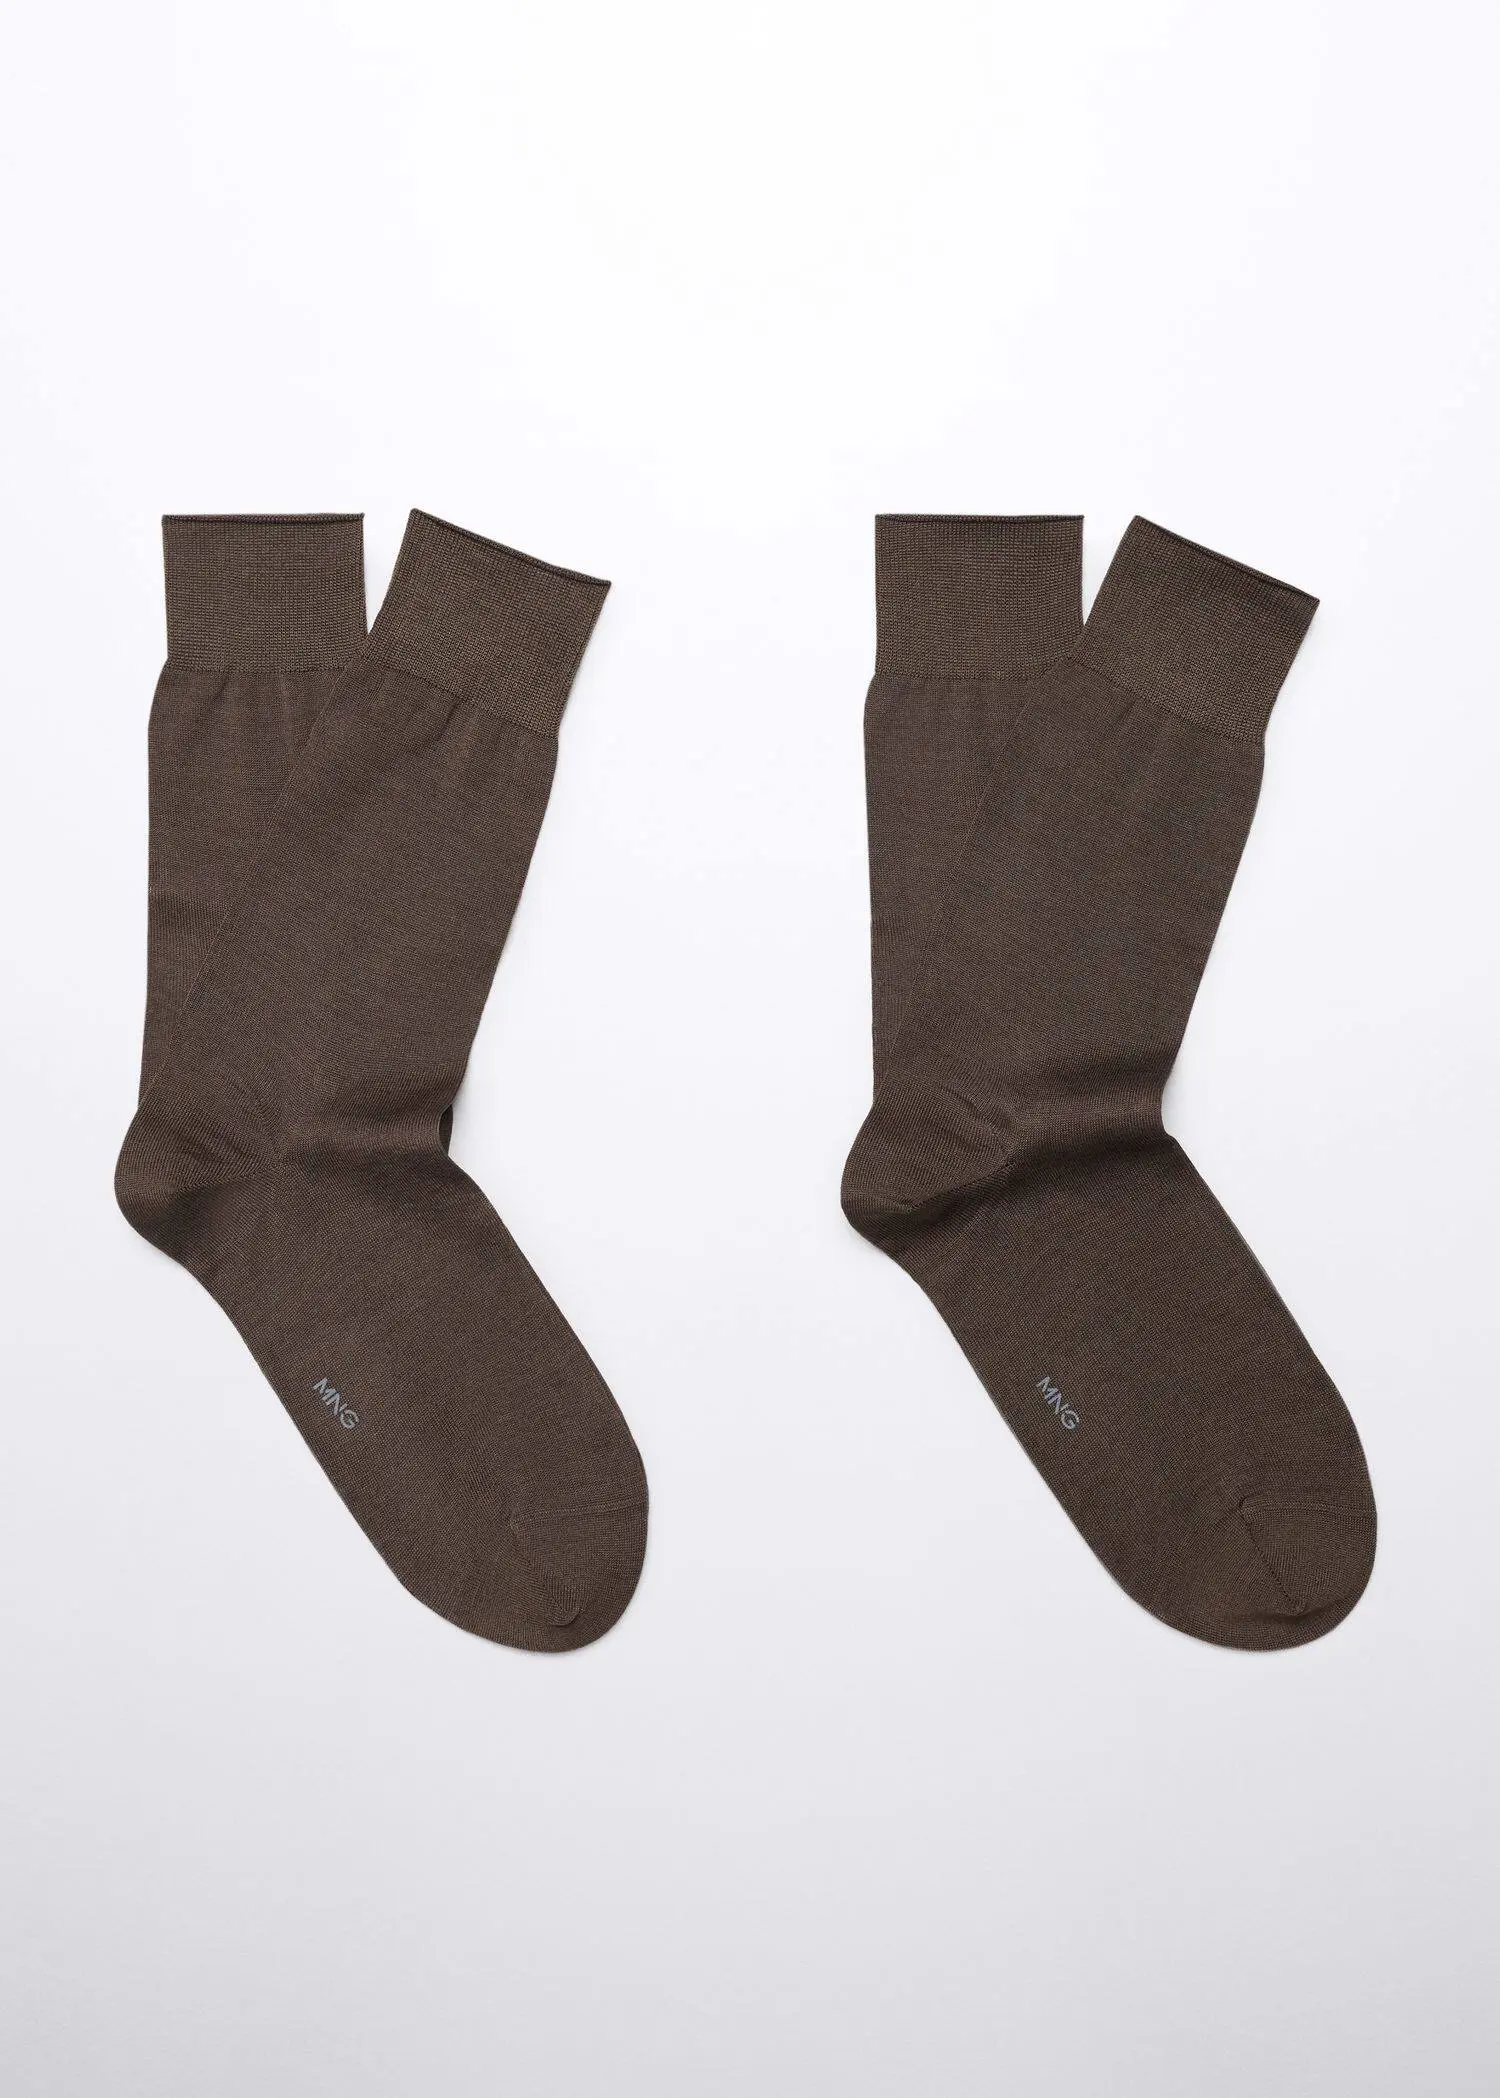 Mango 100% plain cotton socks. two pairs of brown socks on a white background. 